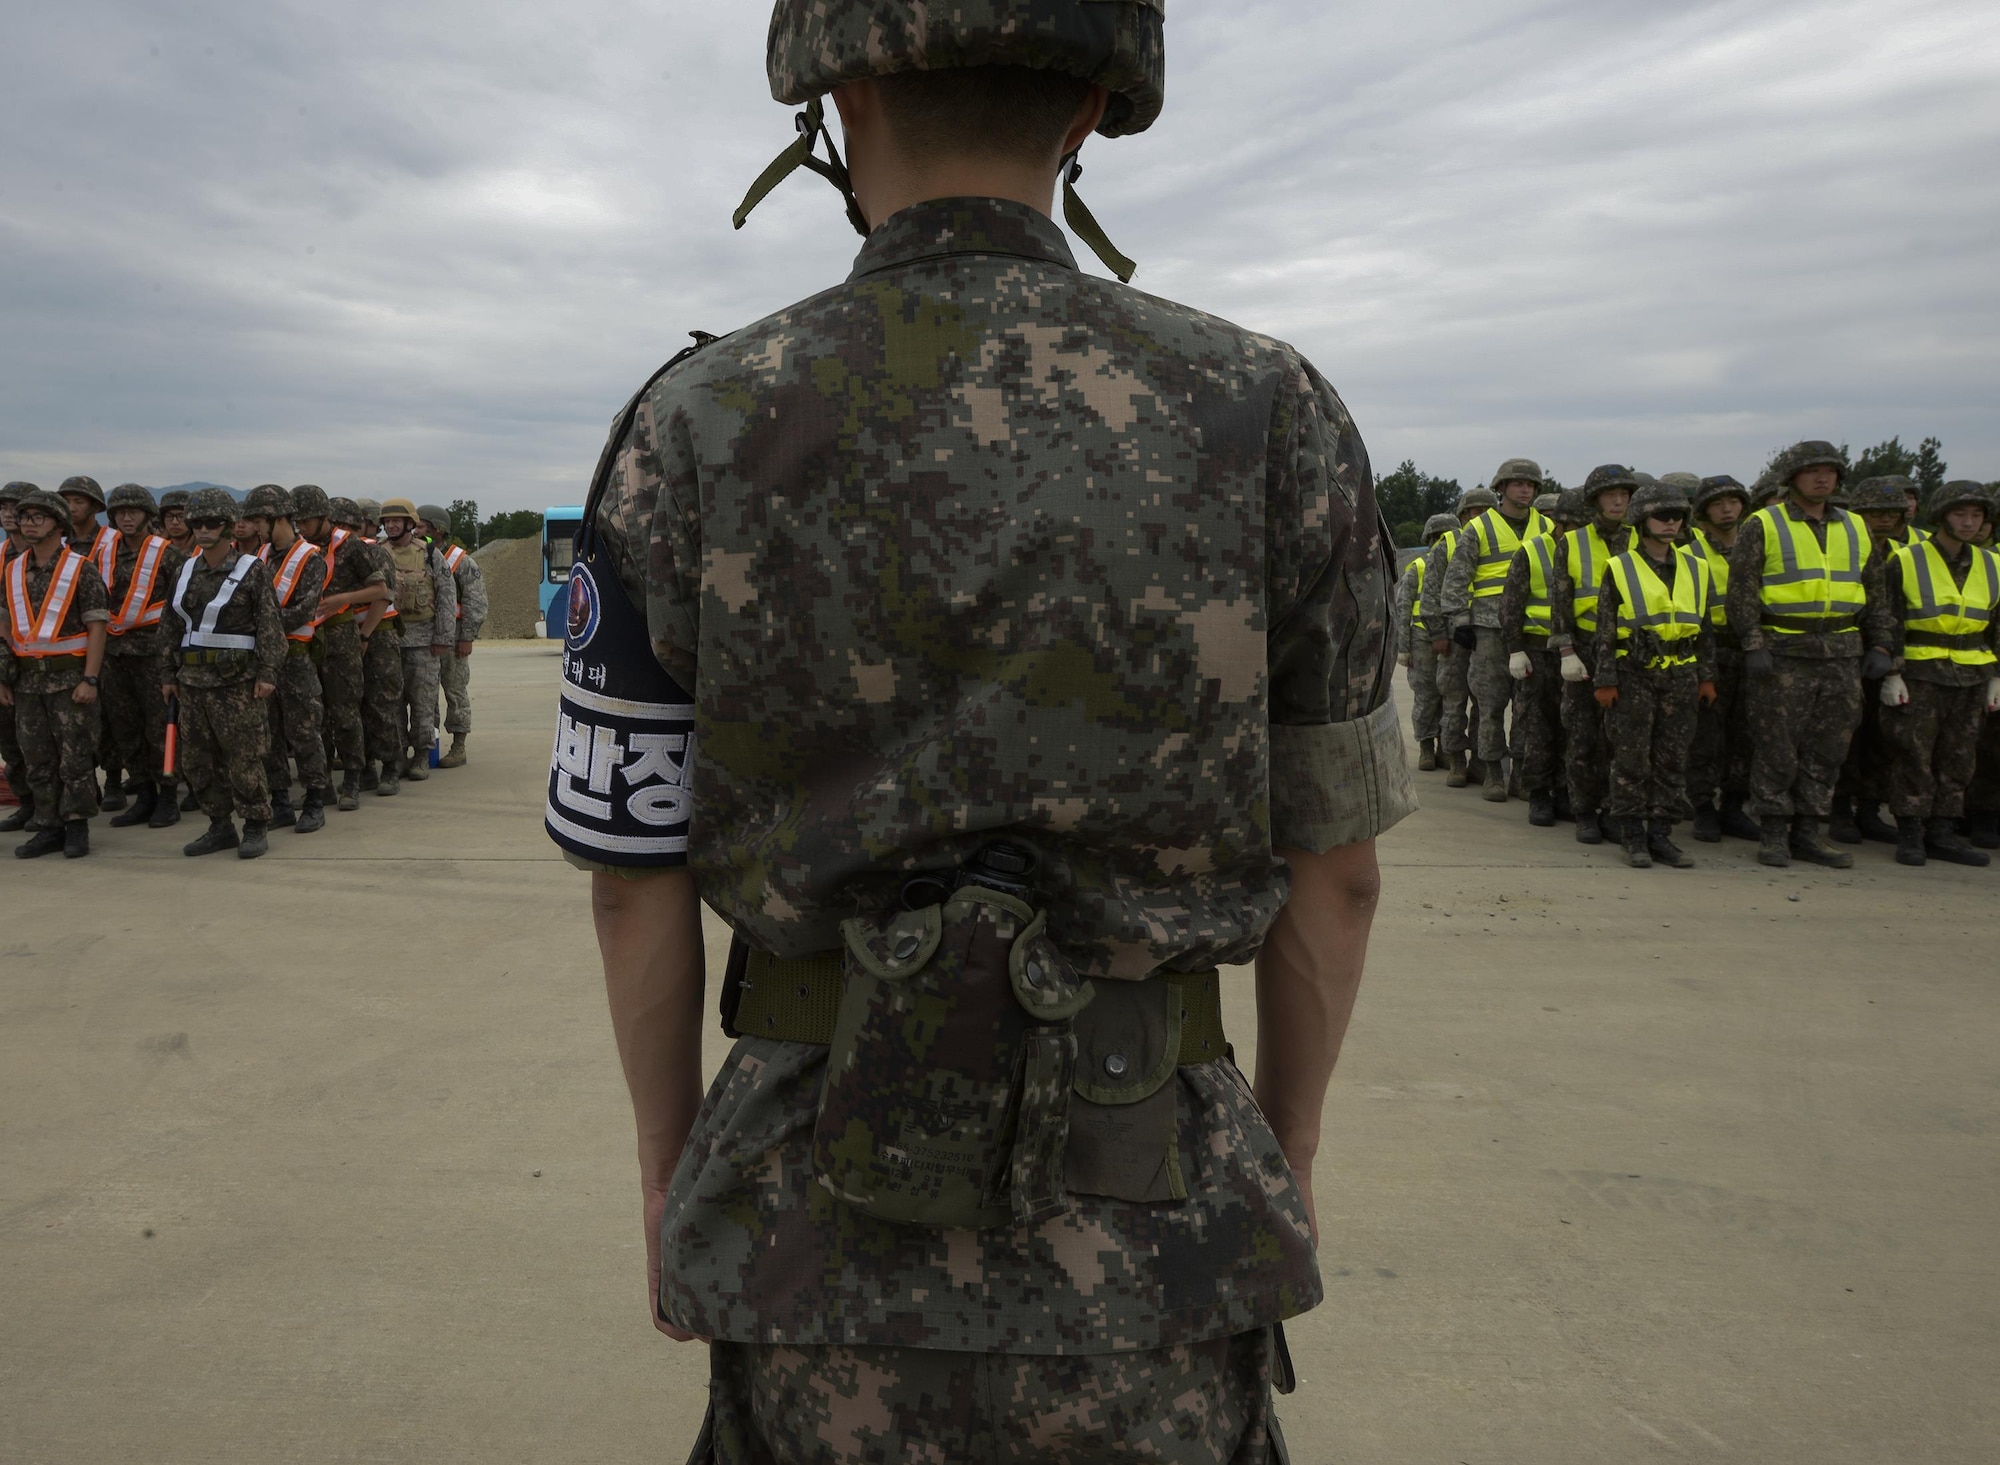 Civil engineer service members from the U.S. and South Korea assemble in formation before being dispatched to repair a runway for exercise Pacific Unity, June 11, 2015, at Jungwon Air Base, South Korea. The goal of Pacific Unity was to develop U.S. Air Force and South Korea engineer interoperability for rapid responses to contingency and disaster response events. (U.S. Air Force photo/Staff Sgt. Jake Barreiro)